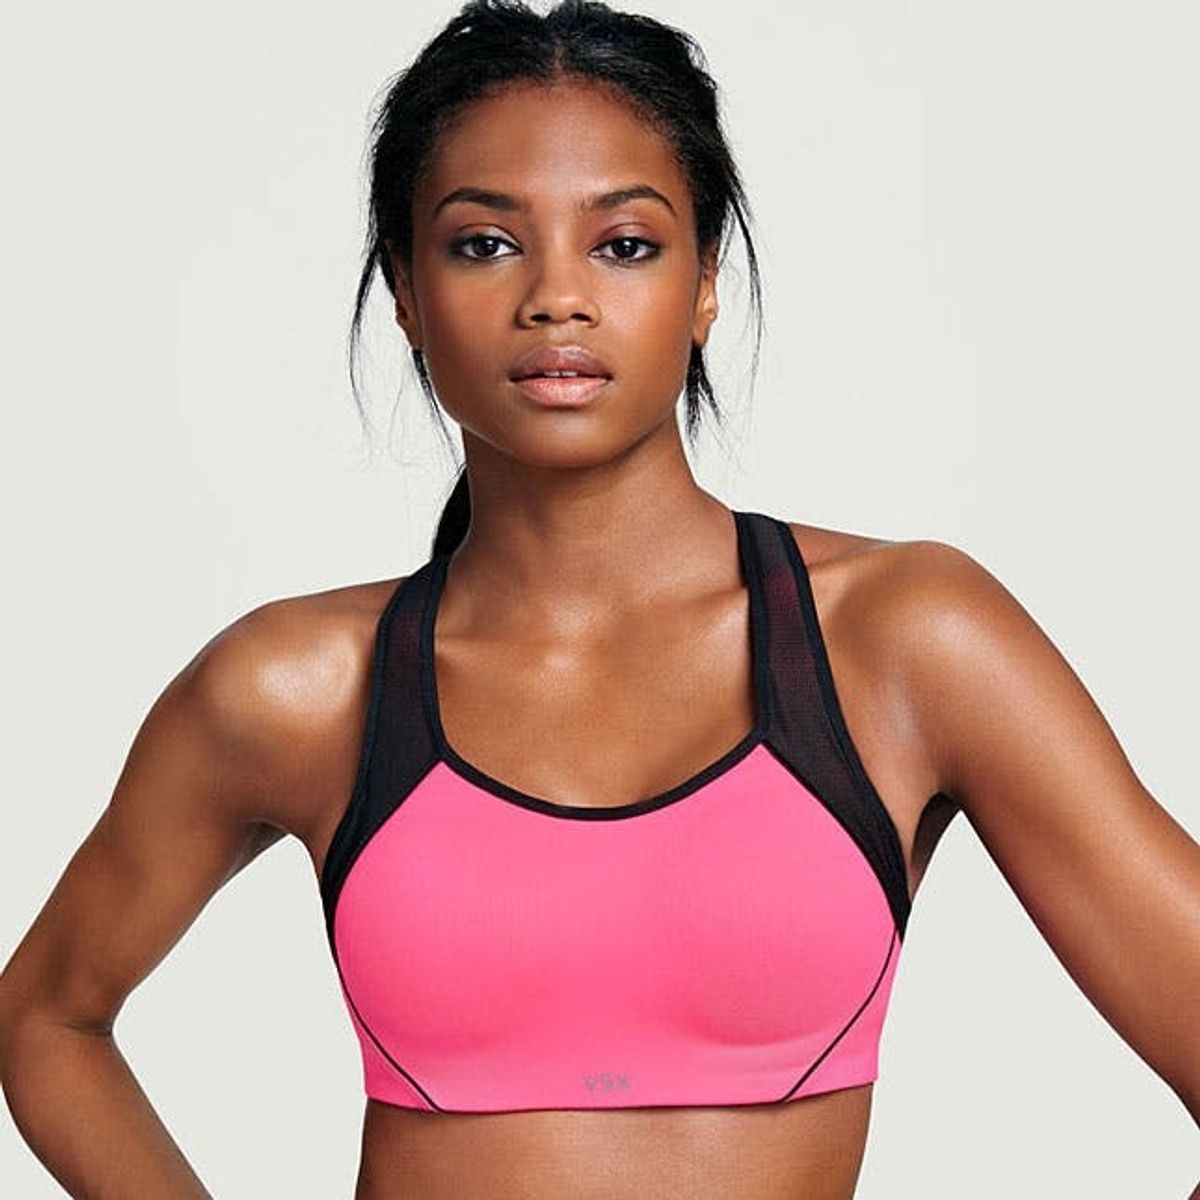 Victoria’s Secret Is Making New Sports Bras for (Yay!) Bigger Boobs